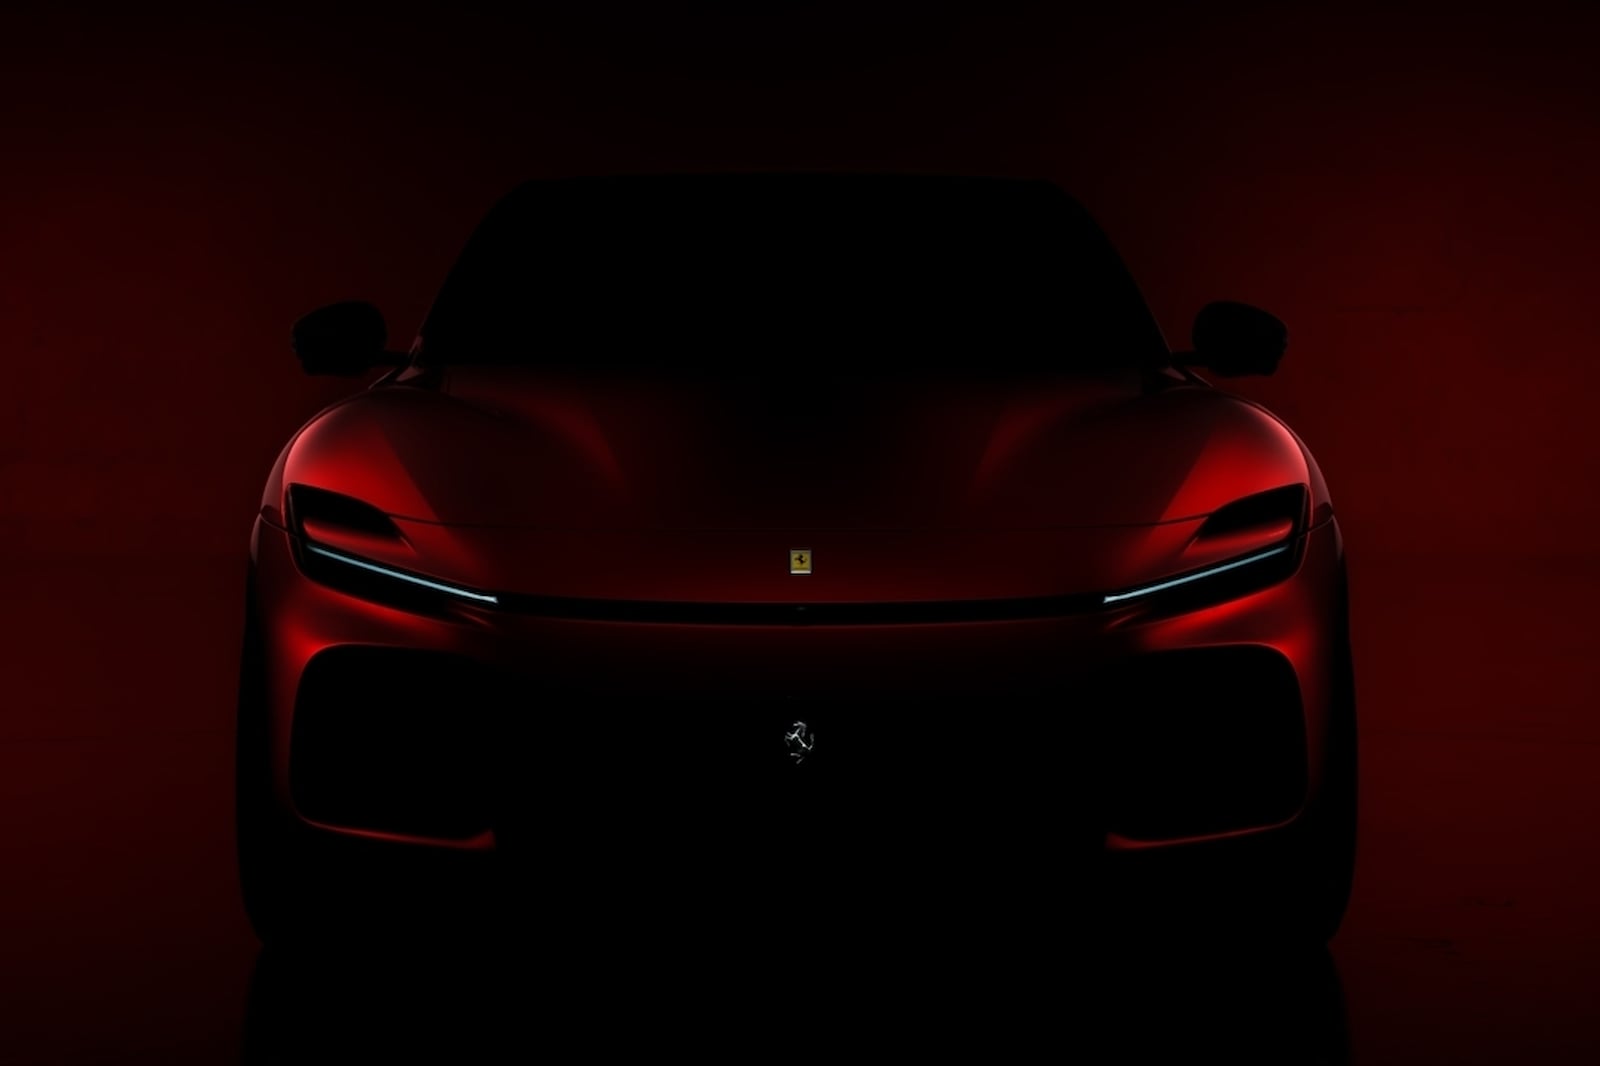 Ferrari Reveals Future Plans With 15 New Models By 2026